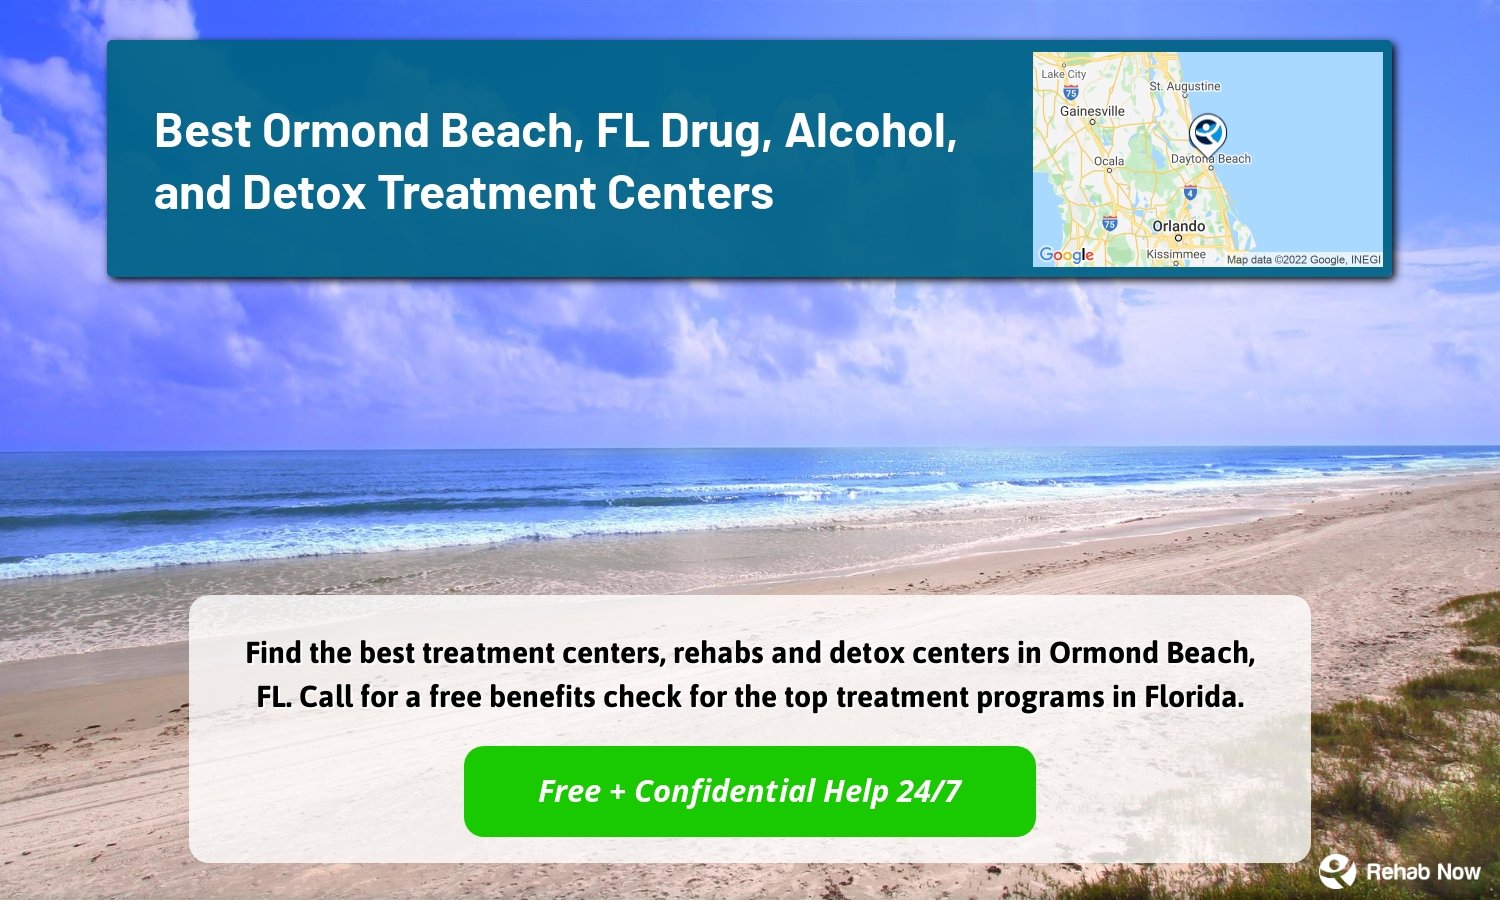 Find the best treatment centers, rehabs and detox centers in Ormond Beach, FL. Call for a free benefits check for the top treatment programs in Florida.